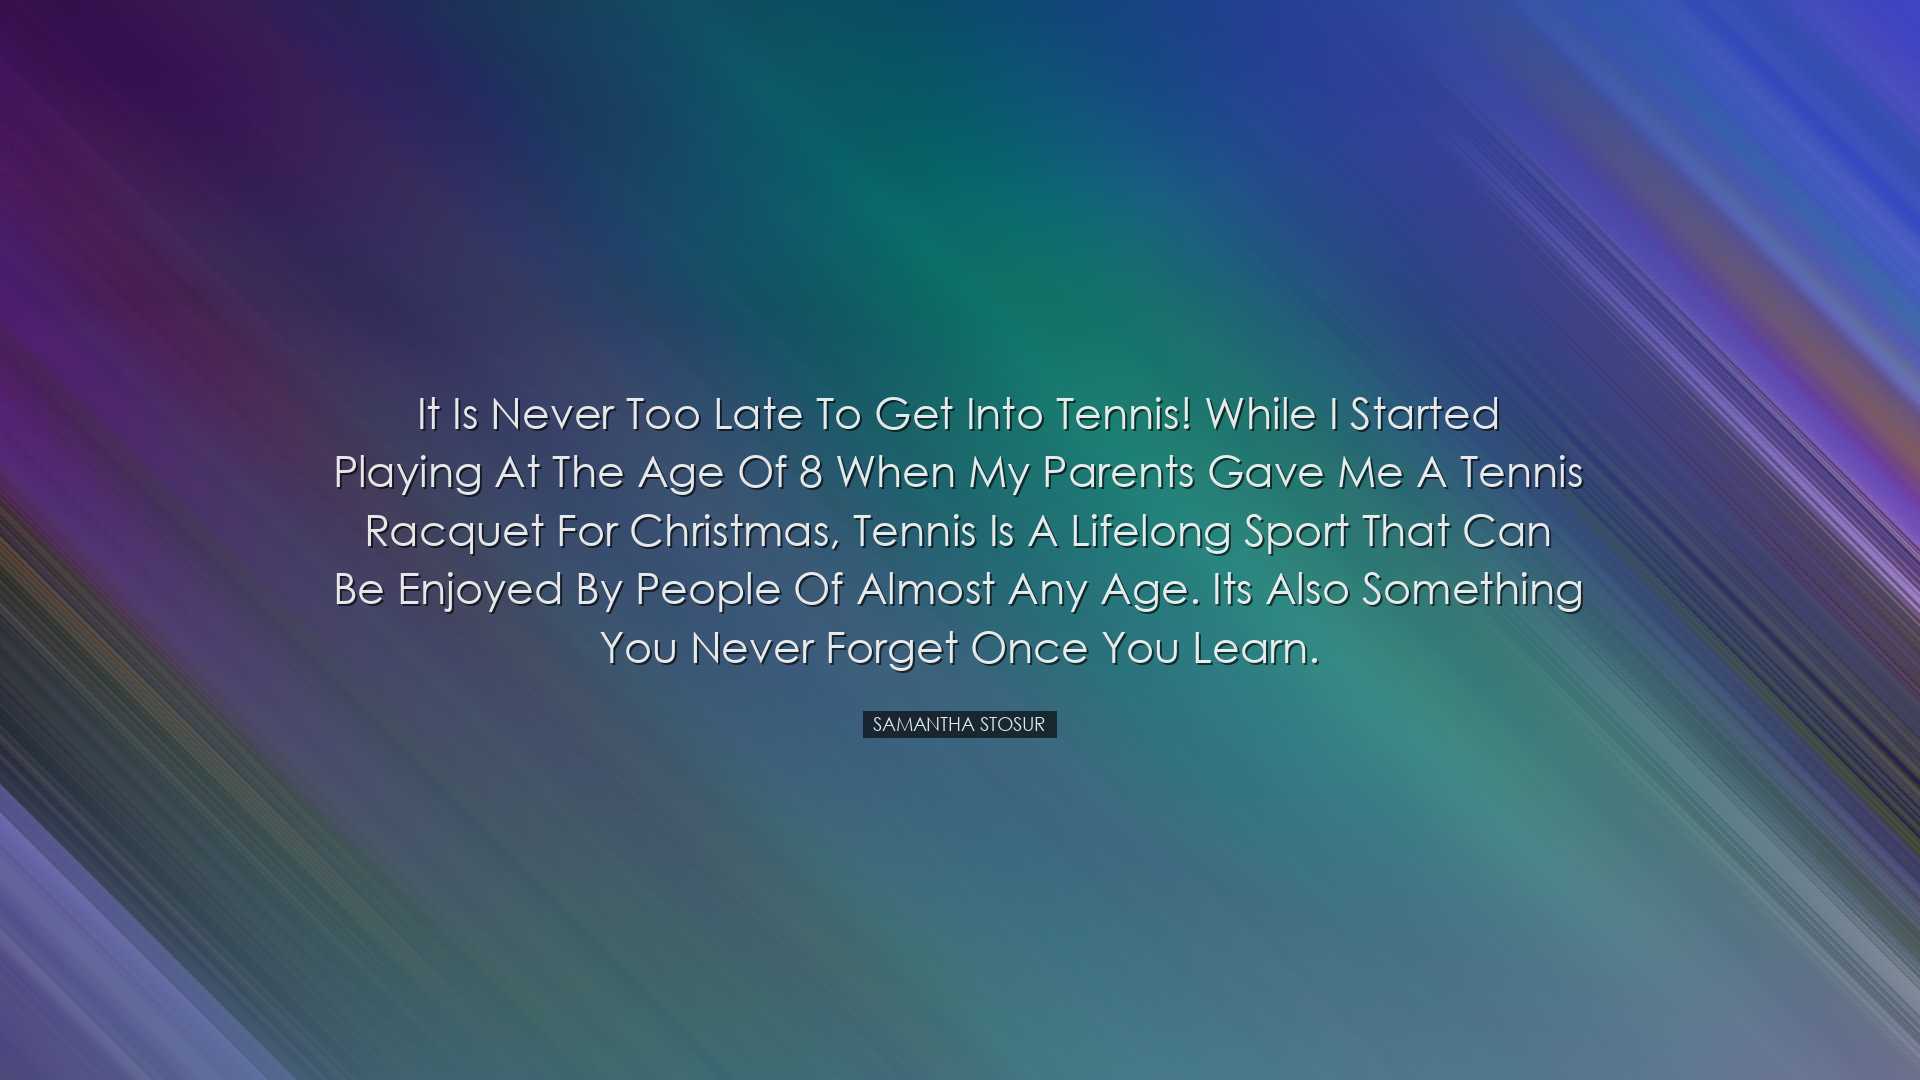 It is never too late to get into tennis! While I started playing a